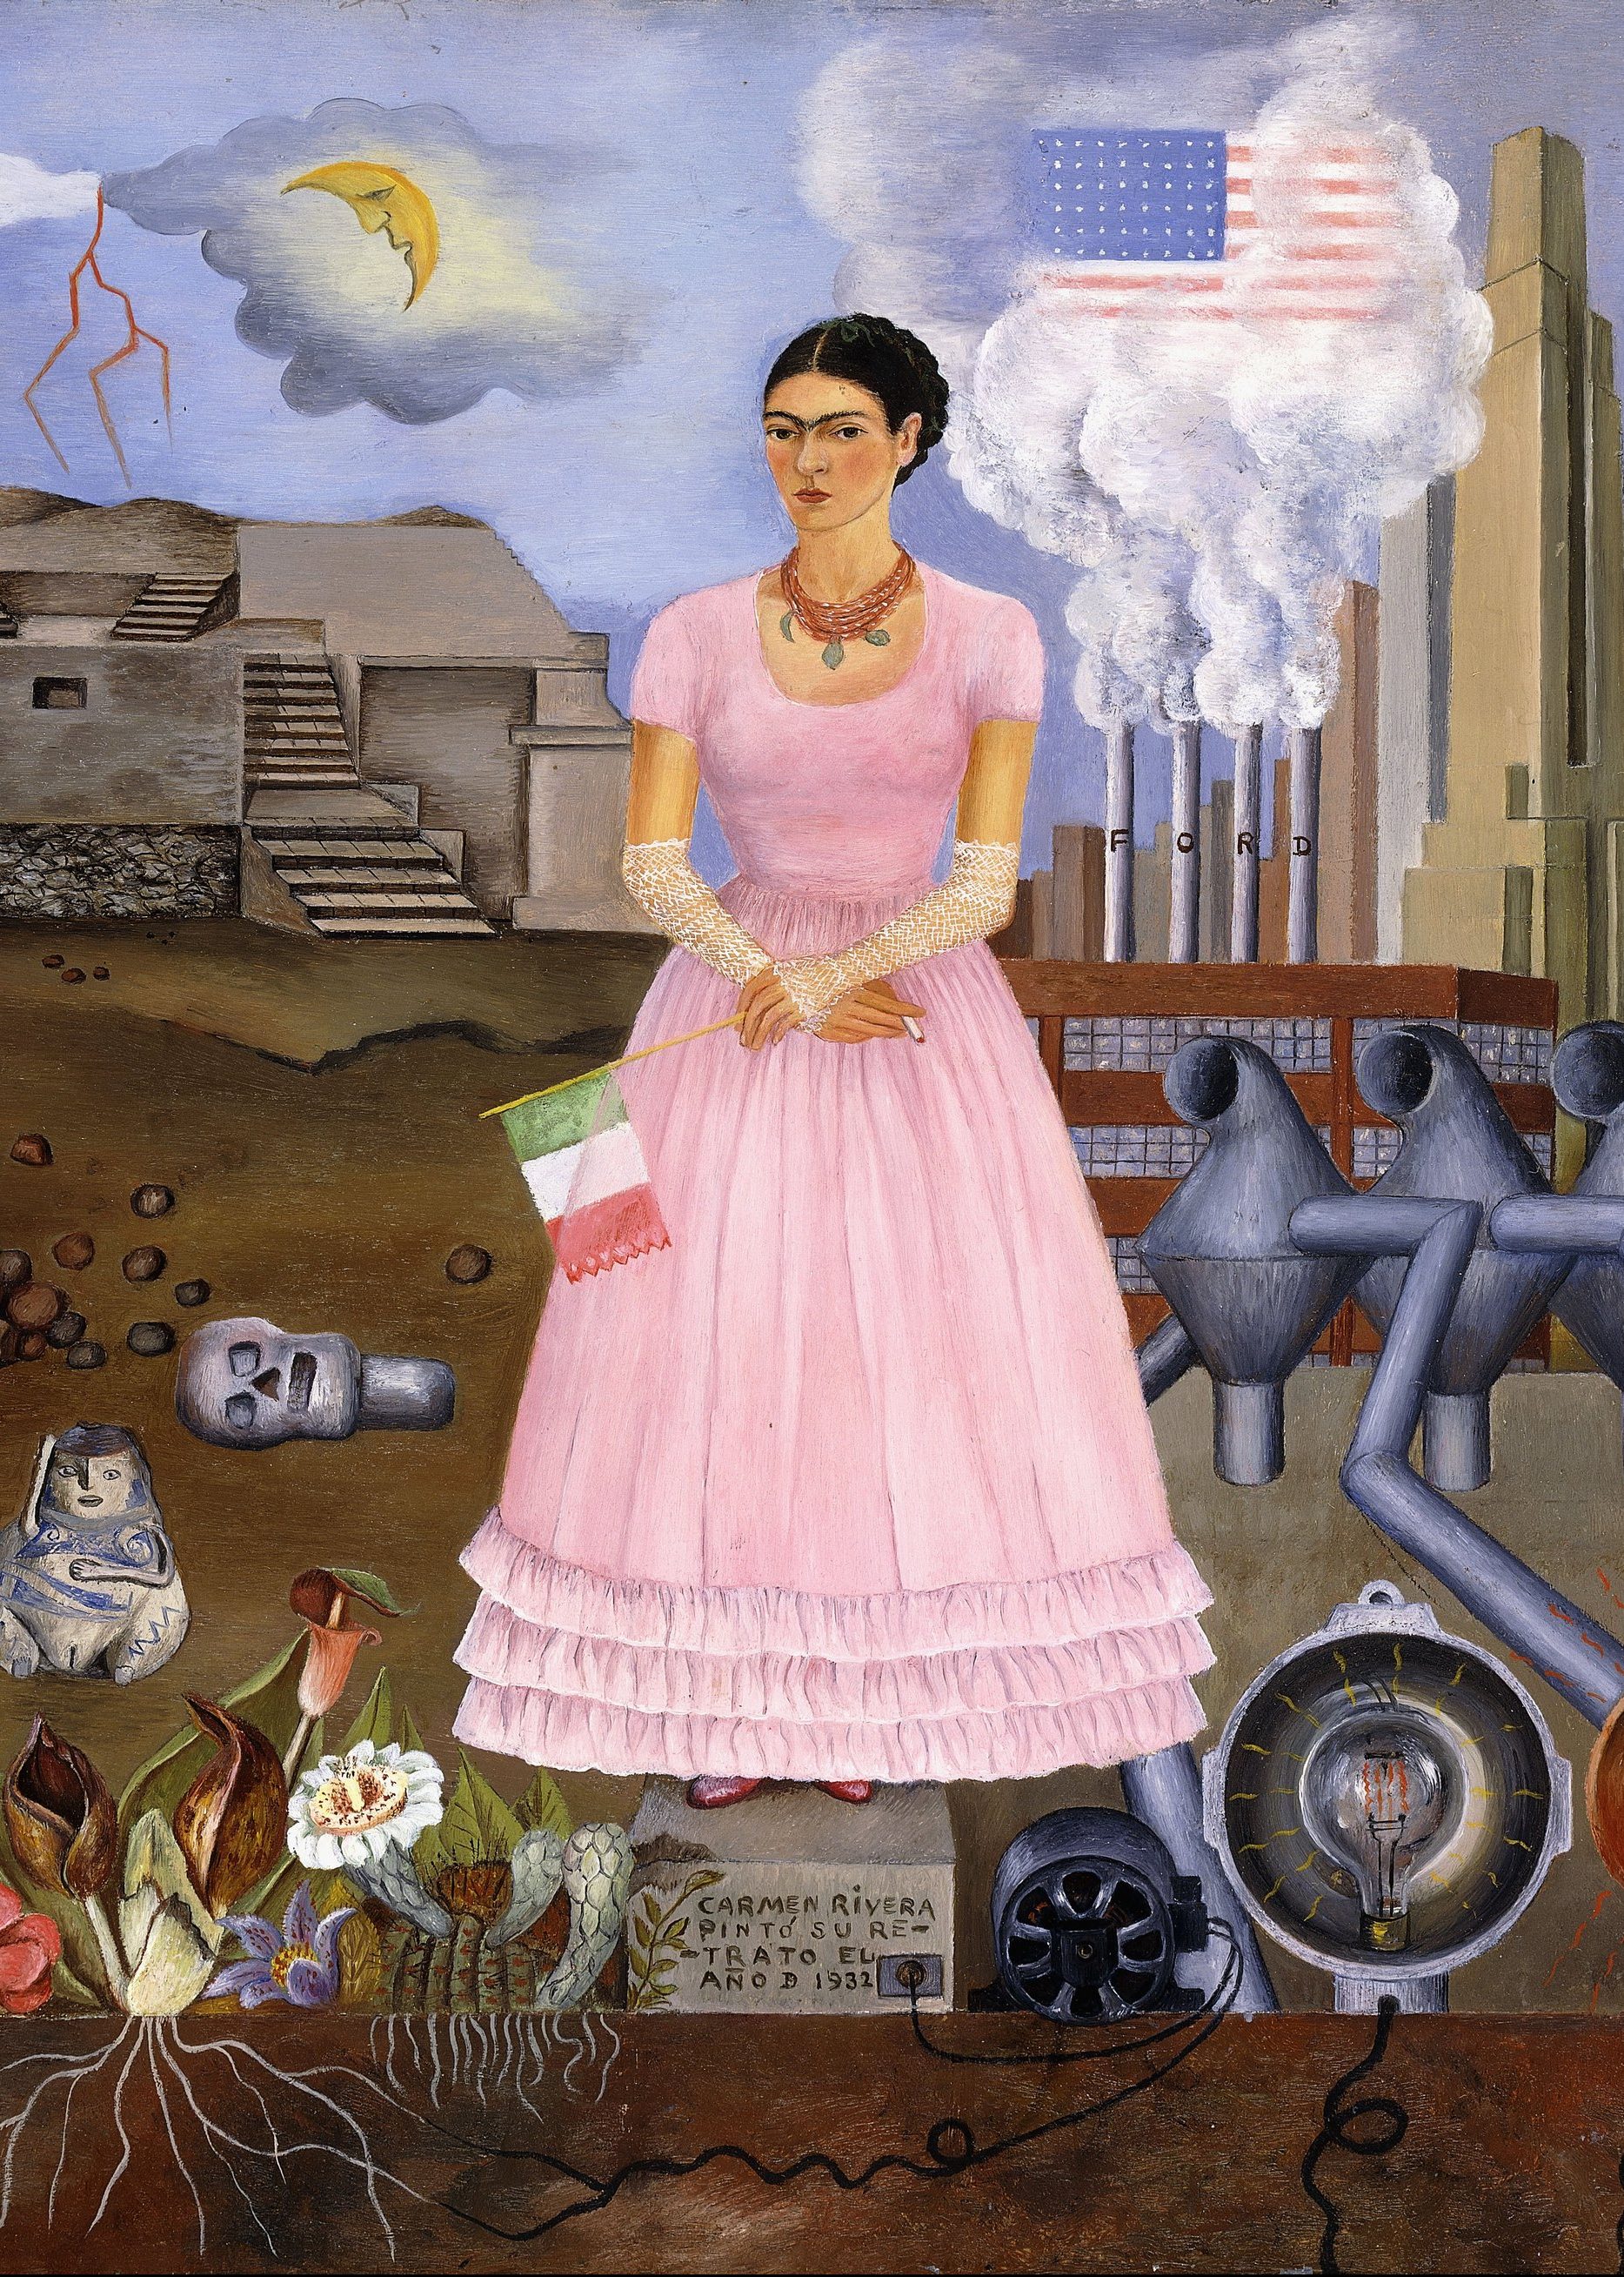 Diego Rivera, Frida Kahlo Among Masters of Mexican Modernism to be Displayed in Philadelphia